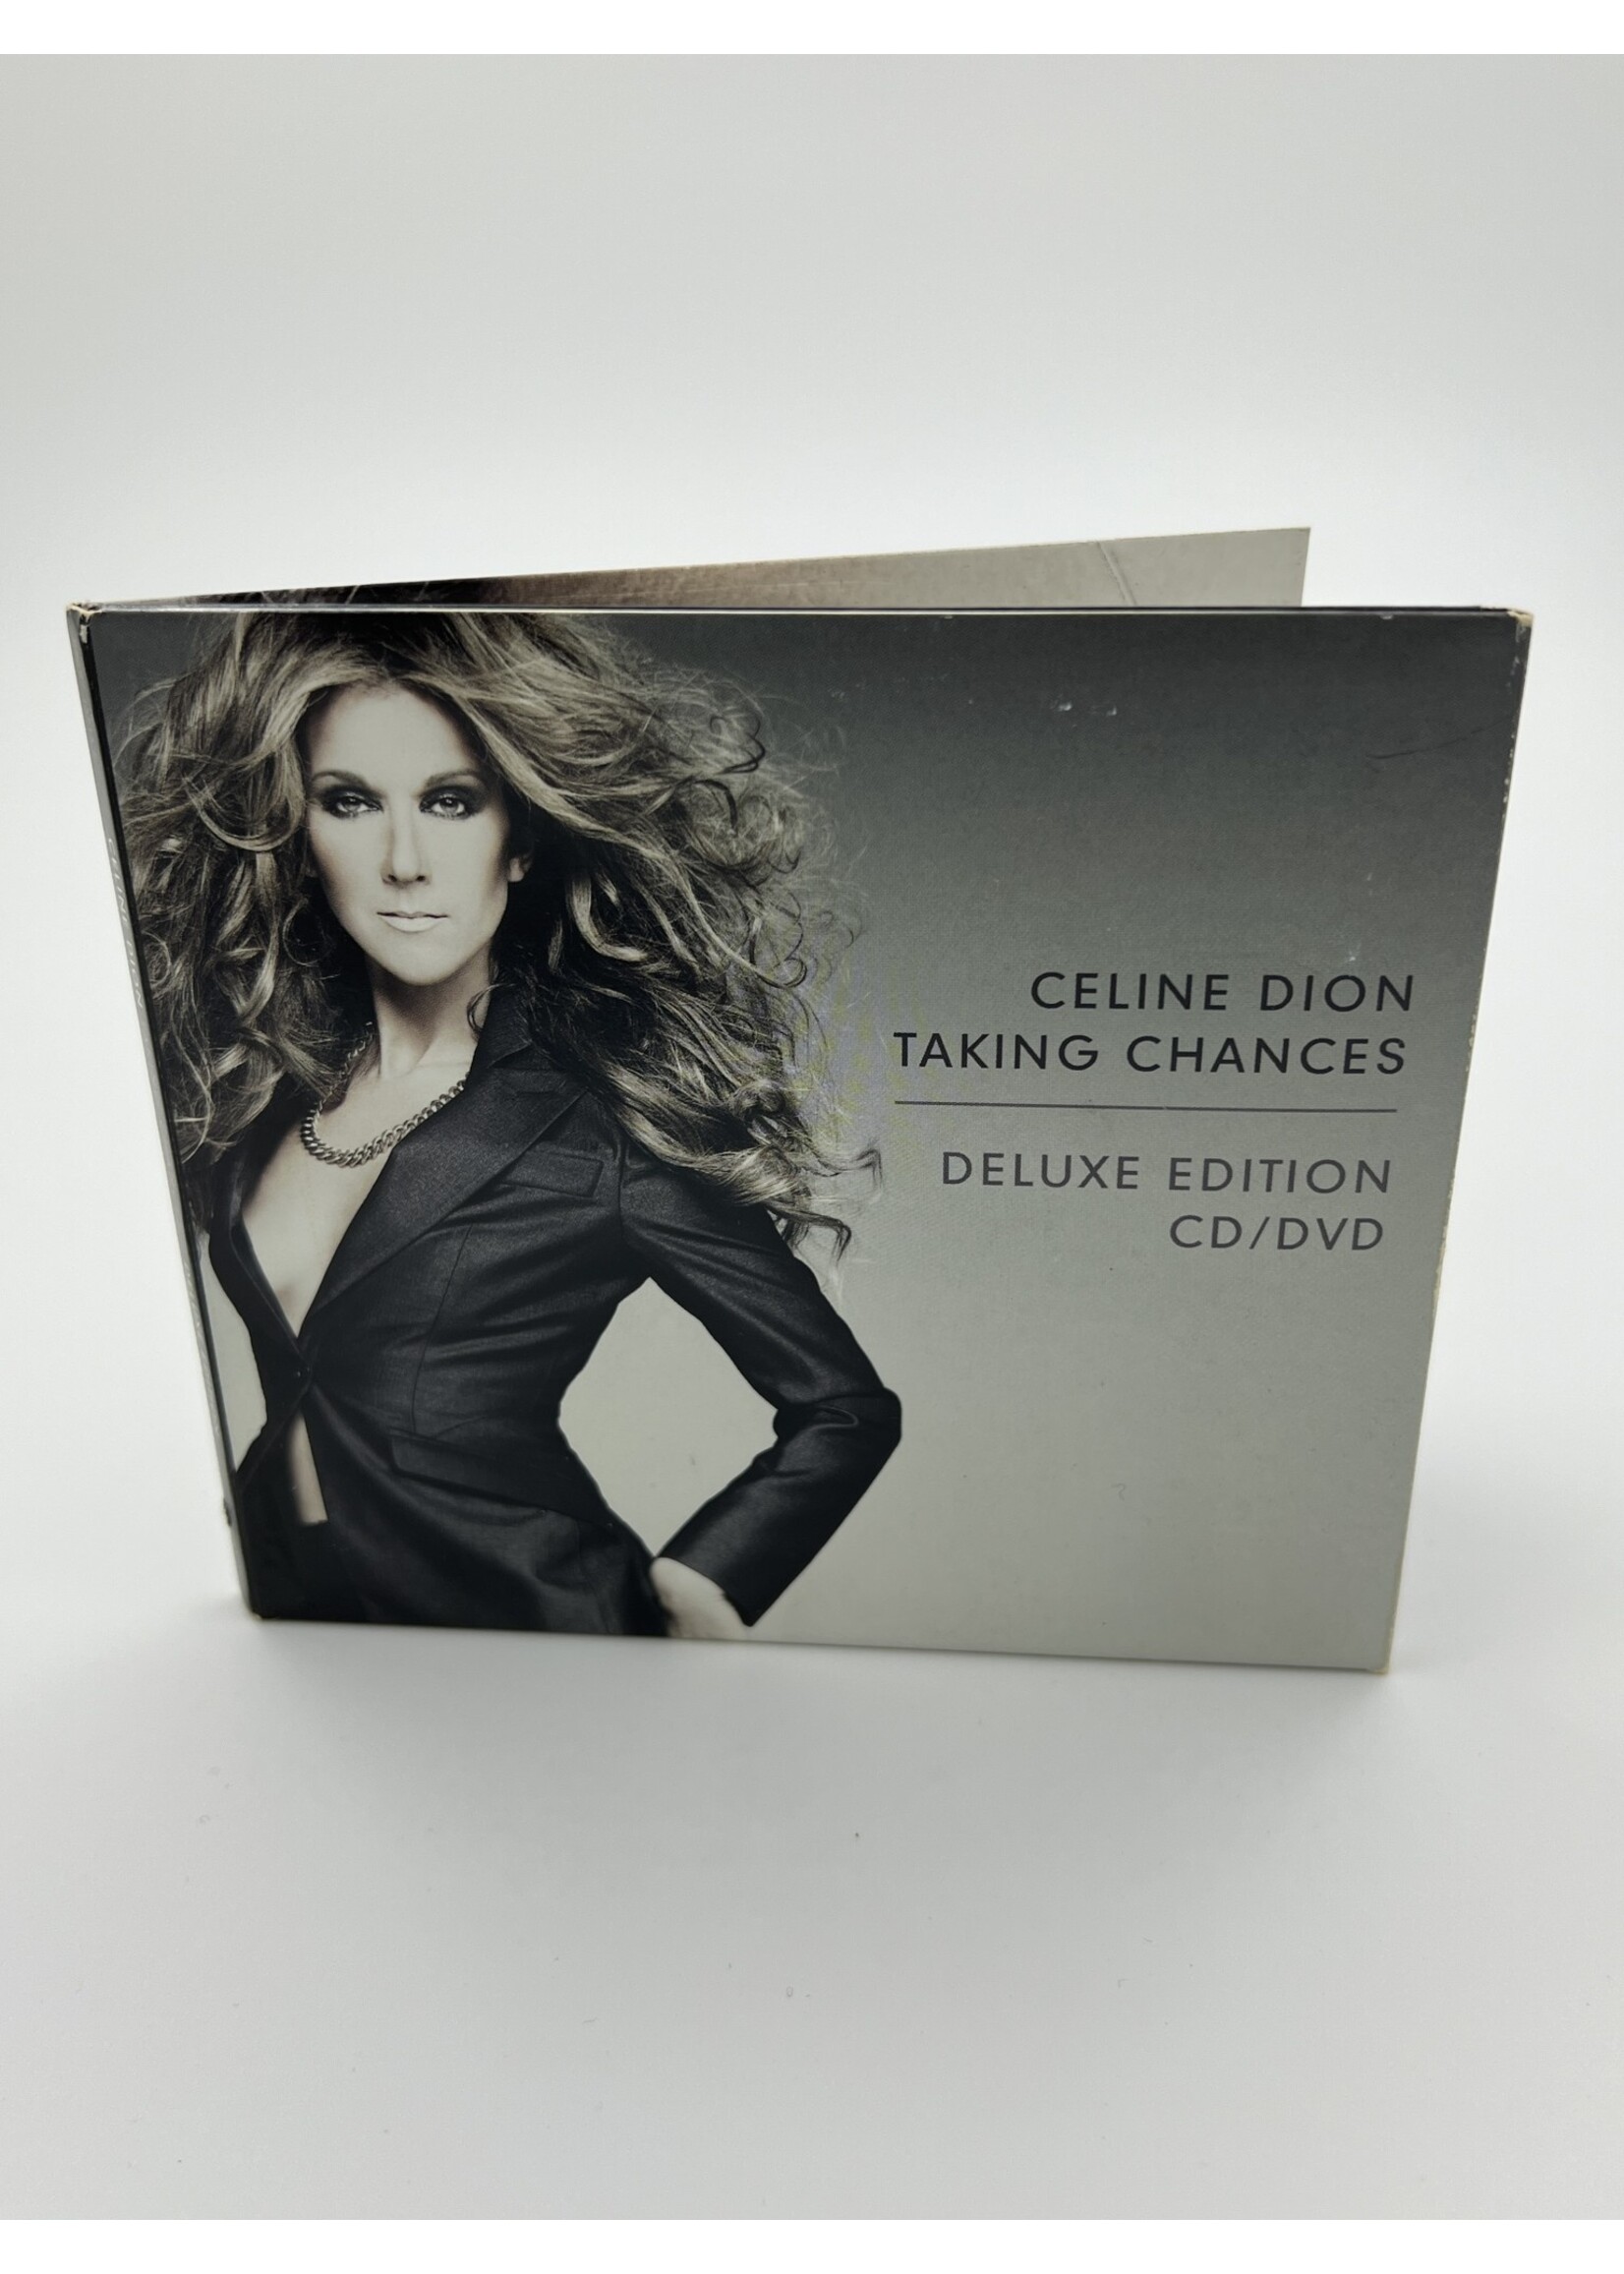 CD Celine Dion Taking Chances Deluxe Edition DVD CD